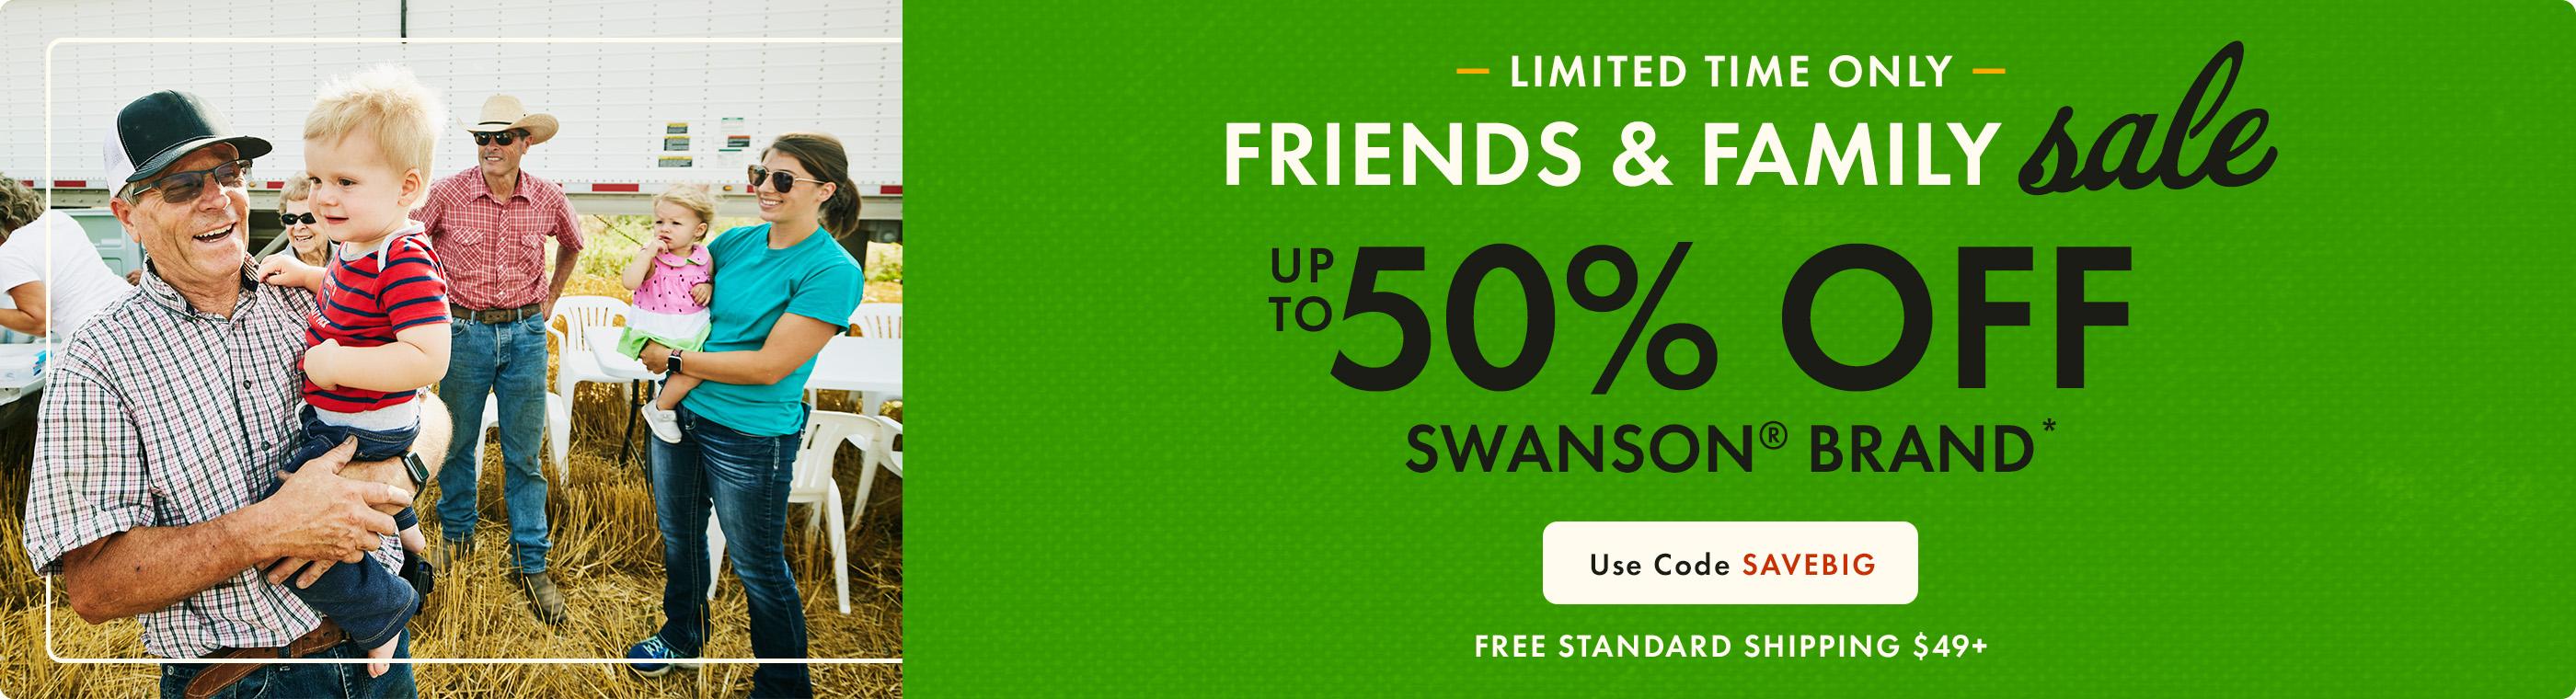 Up To 50% Off Swanson Brand 